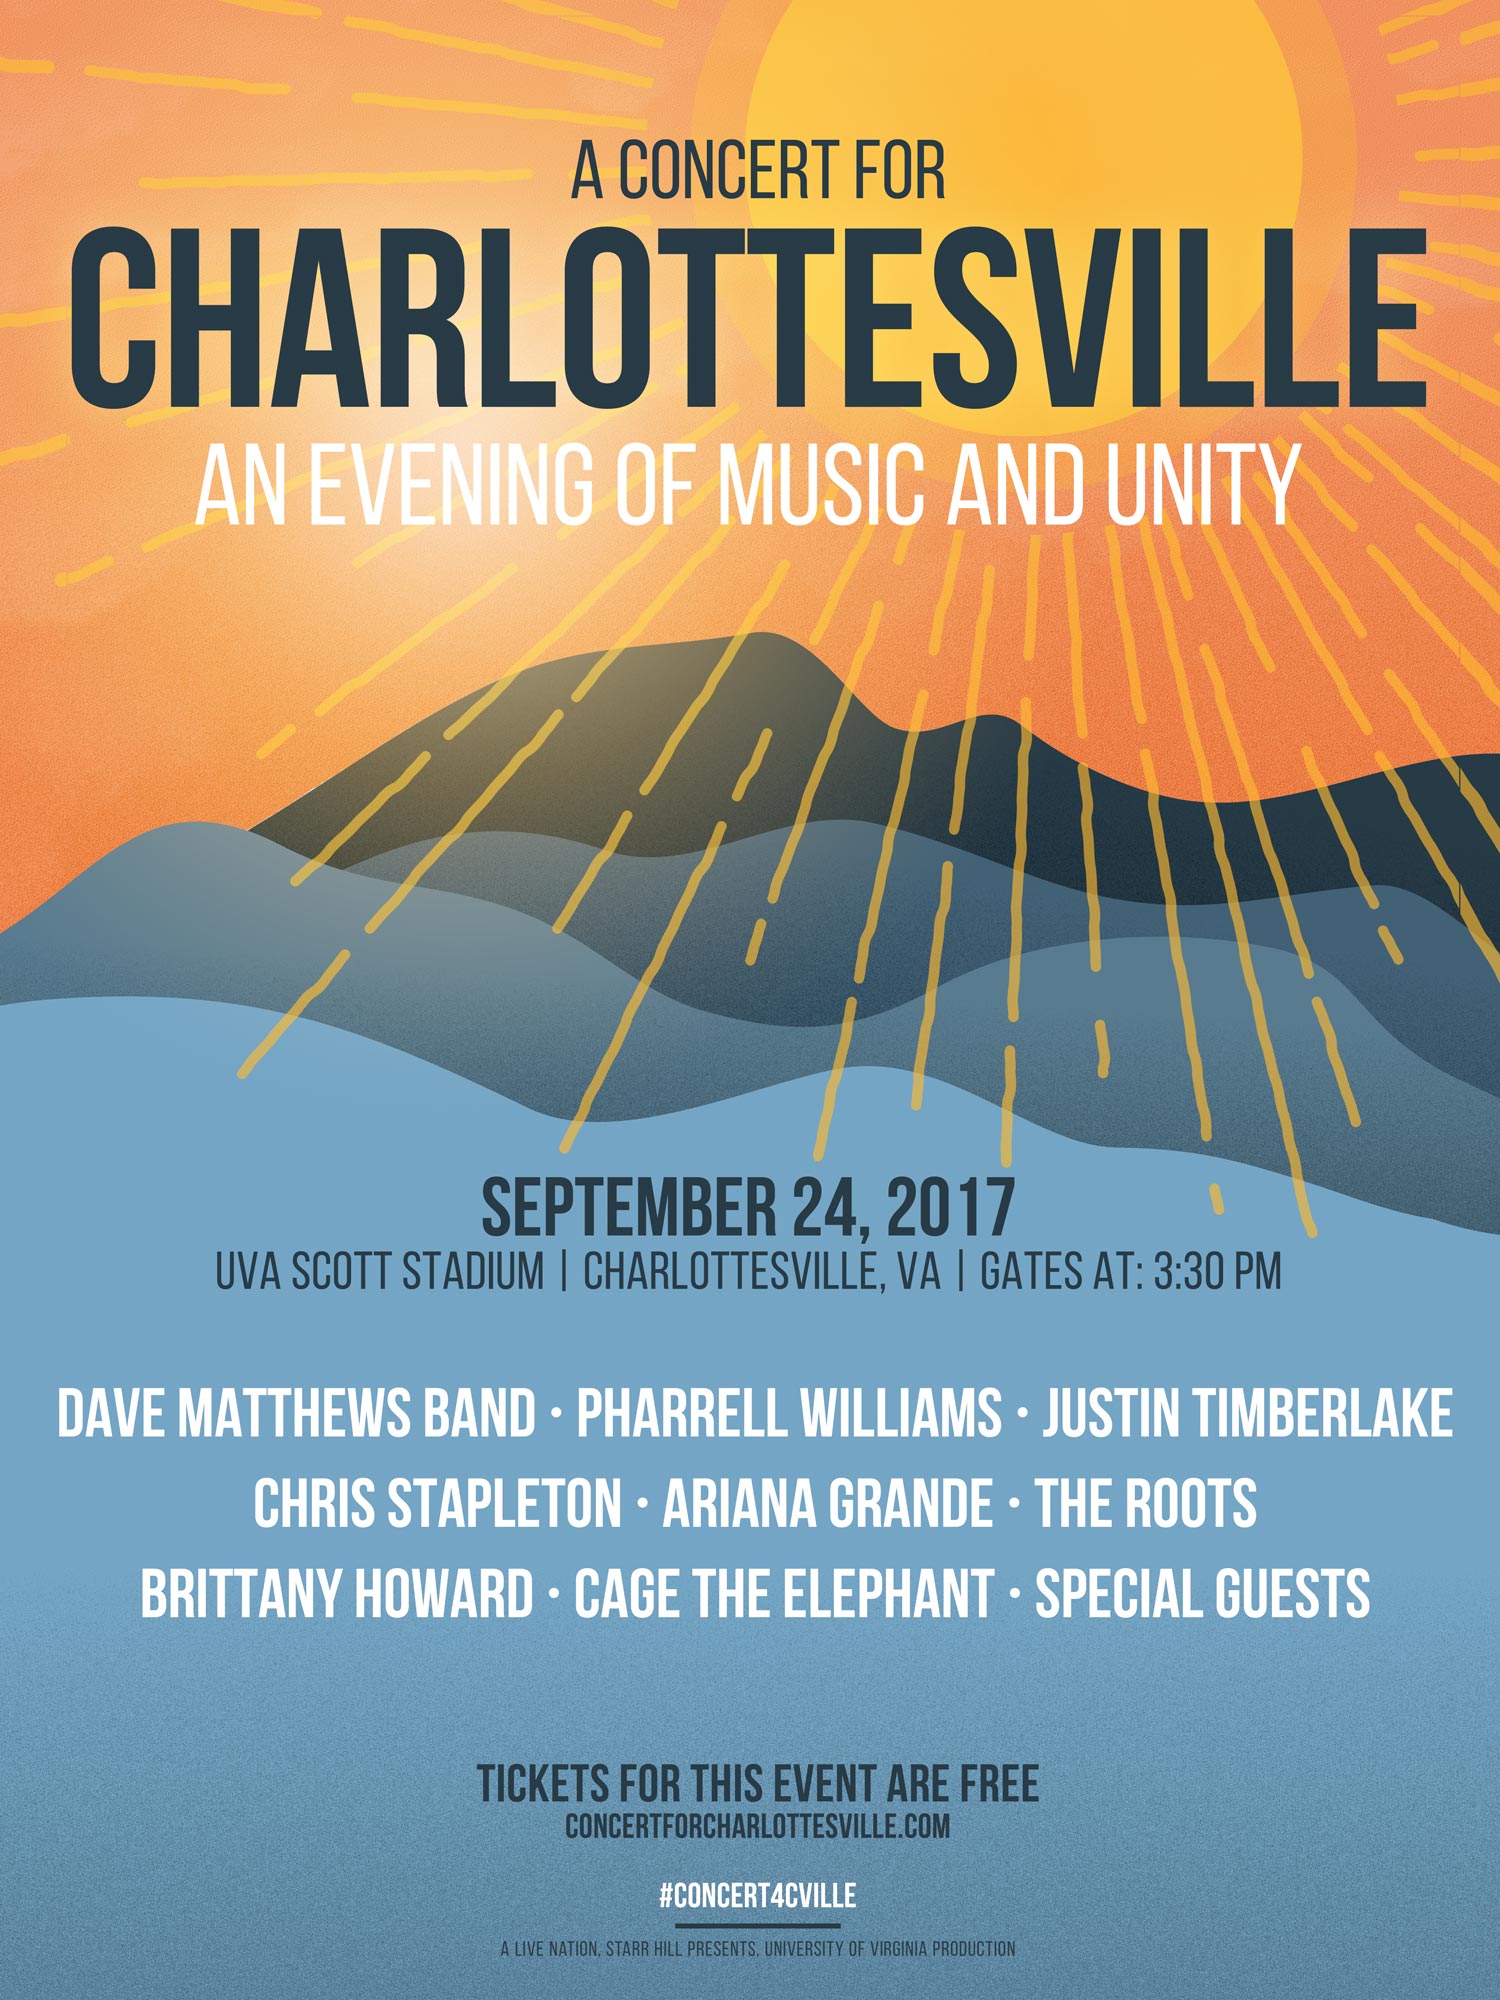 Text reads: A concert for Charlottesville an evening of music and unity September 24, 2017 UVA Scott Stadium | Charlottesville, VA | Gates at 4pm Dave matthews band, pharrell williams, justin timberlake, chris stapleton, ariana grande the roots brittany howard, cage the elephant, and special guests